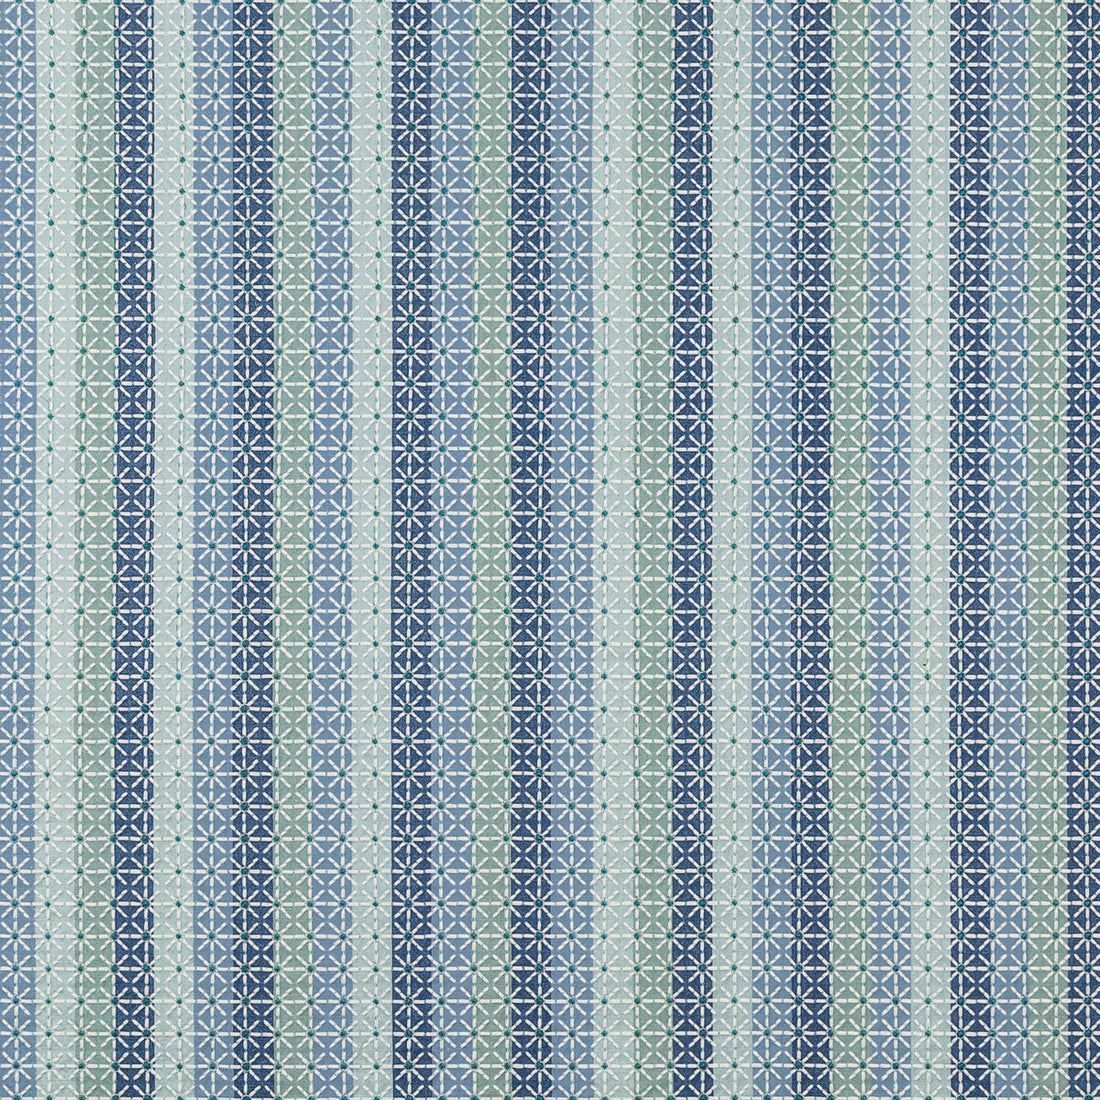 Bentota fabric in chambray color - pattern 35769.513.0 - by Kravet Basics in the Ceylon collection